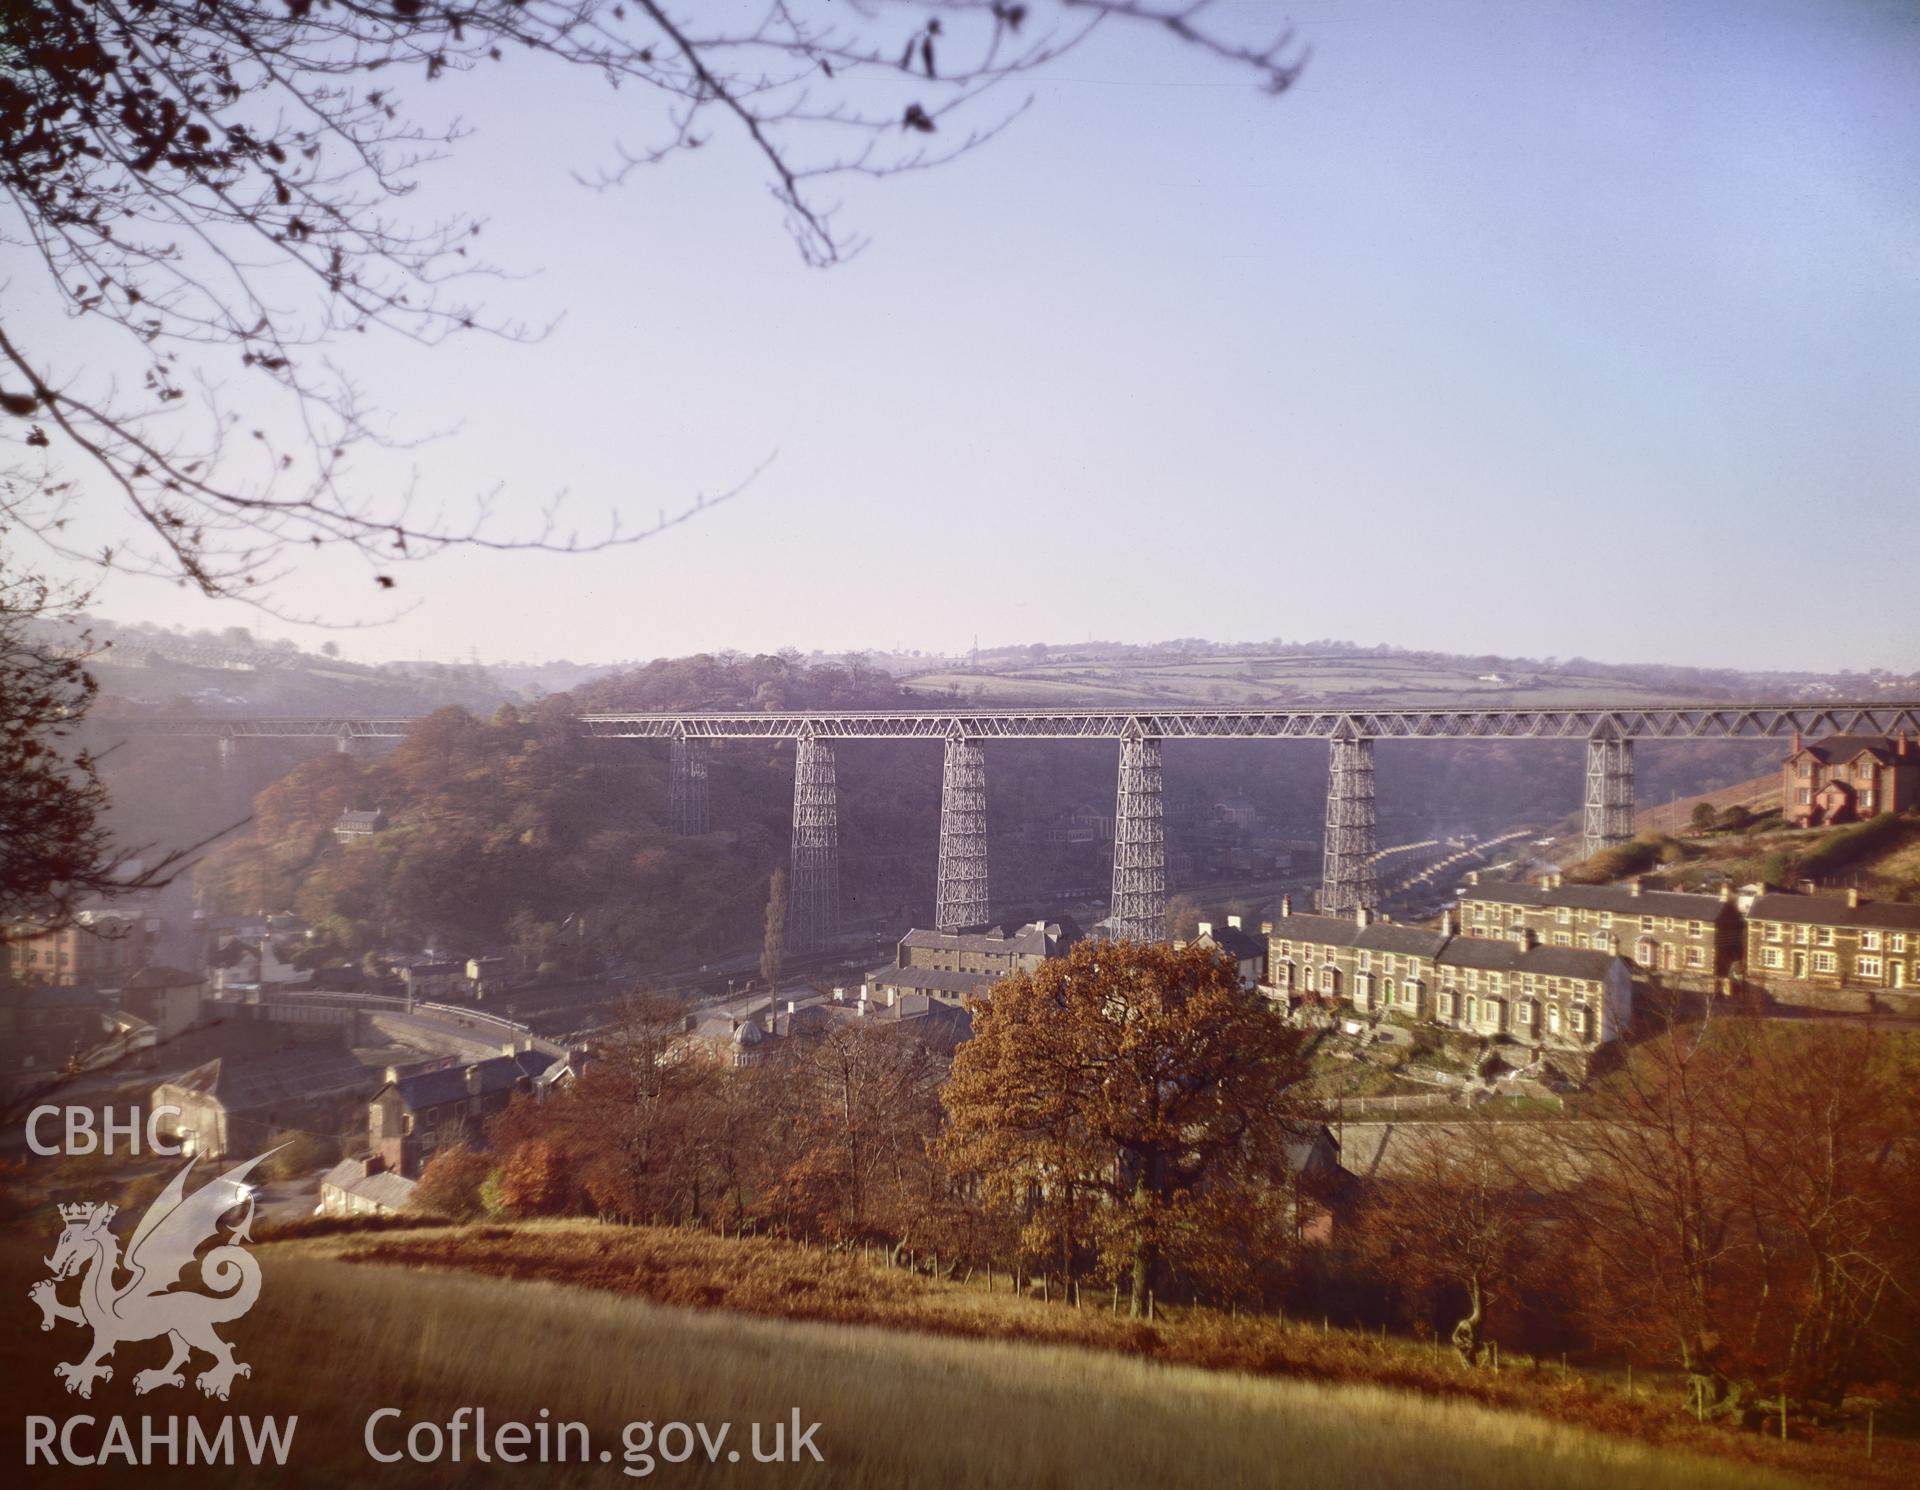 RCAHMW colour transparency showing  view of Crumlin Viaduct